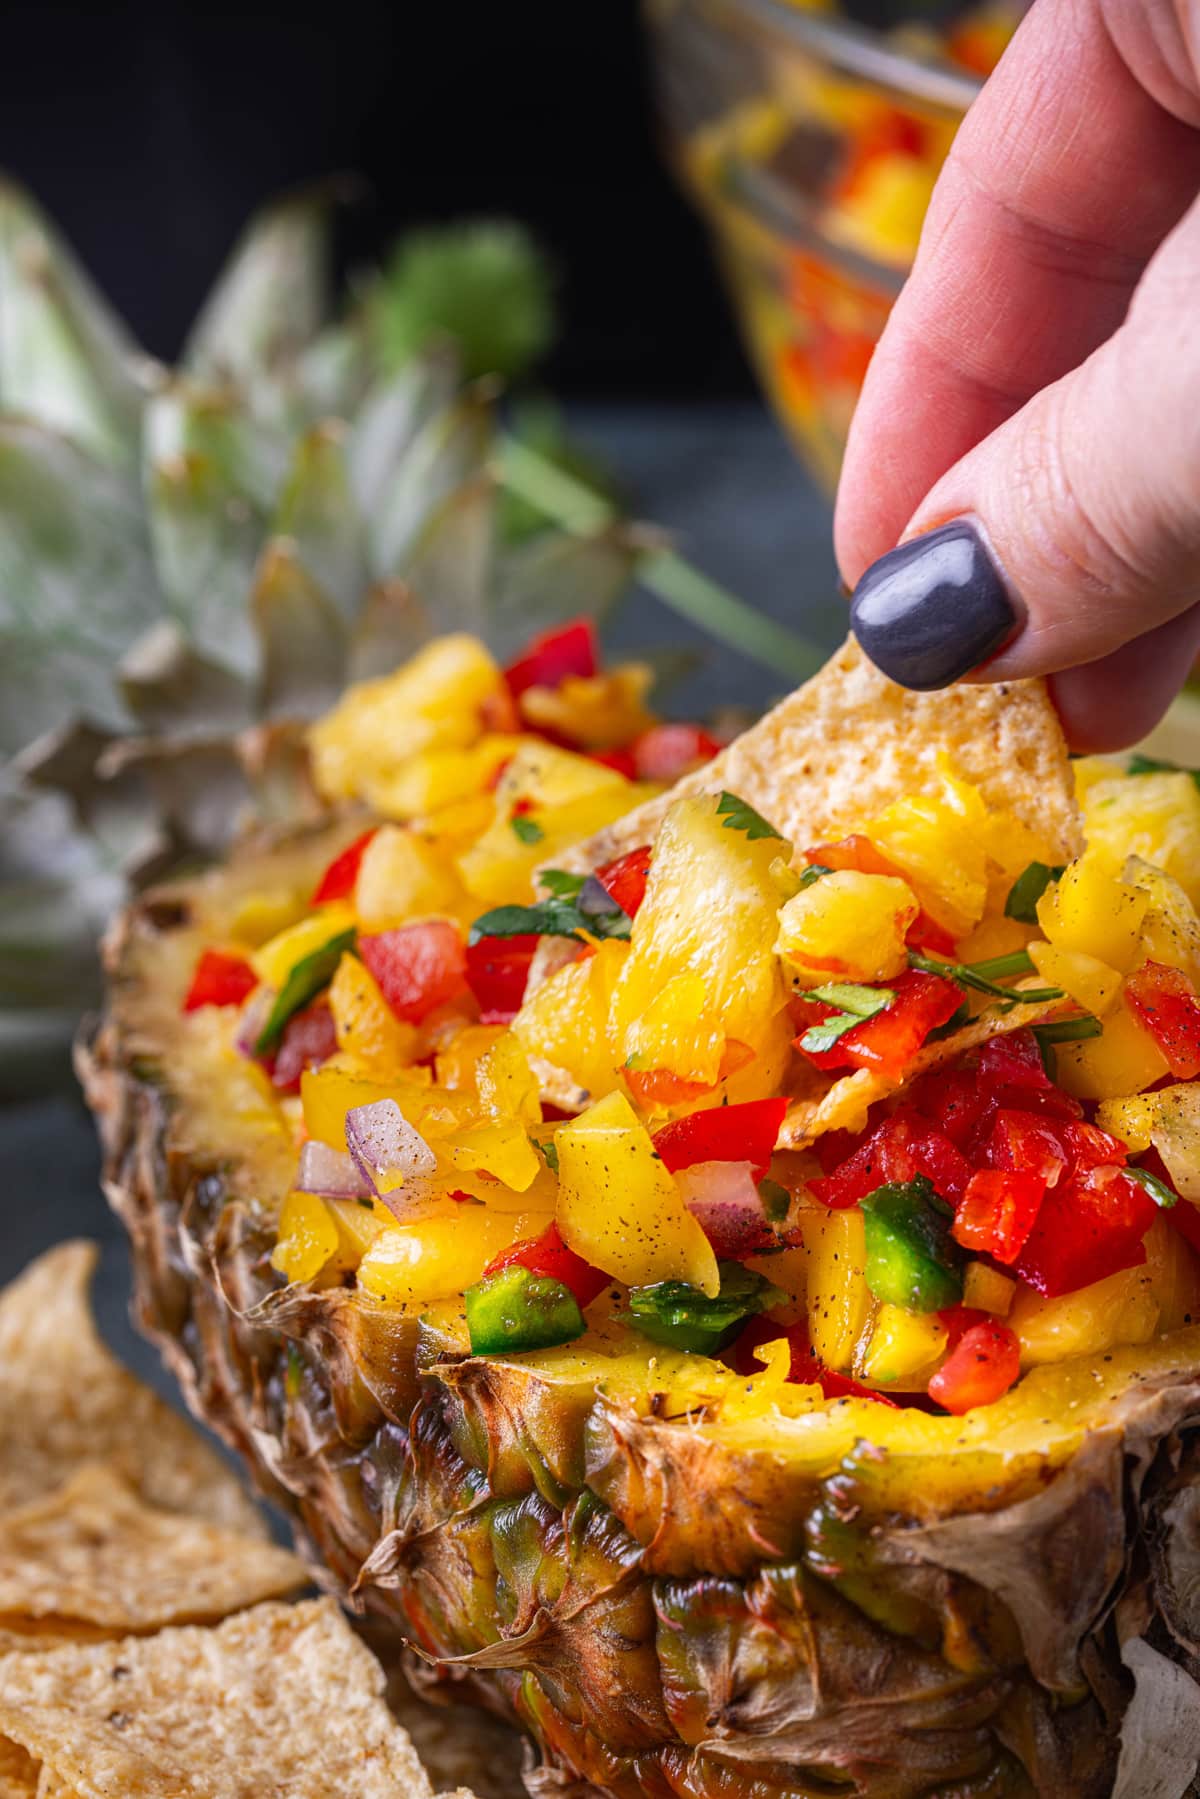 hand dipping chip into Pineapple Salsa